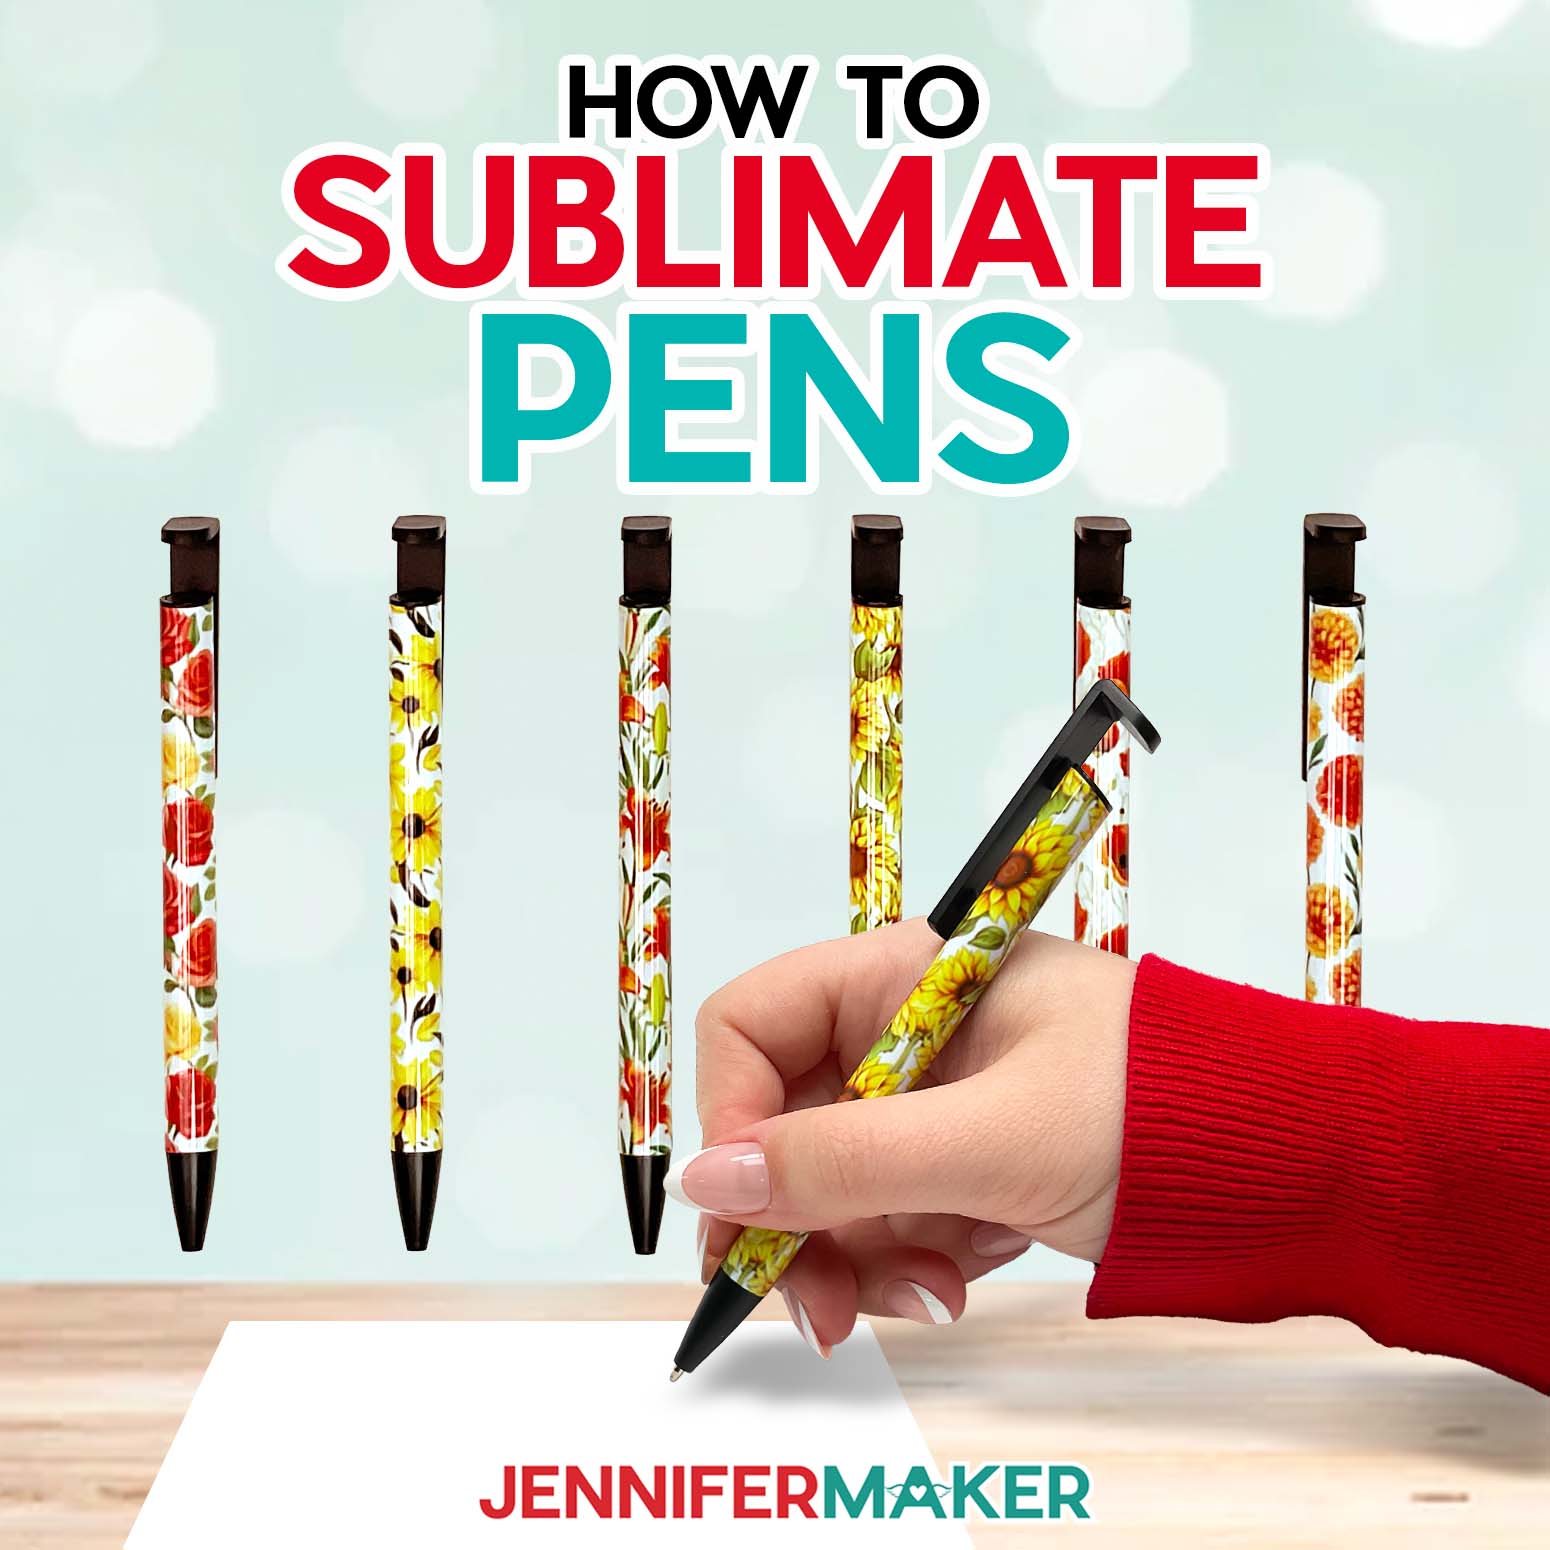 How to Sublimate Pens: Learn the Easy Way with this New Tool